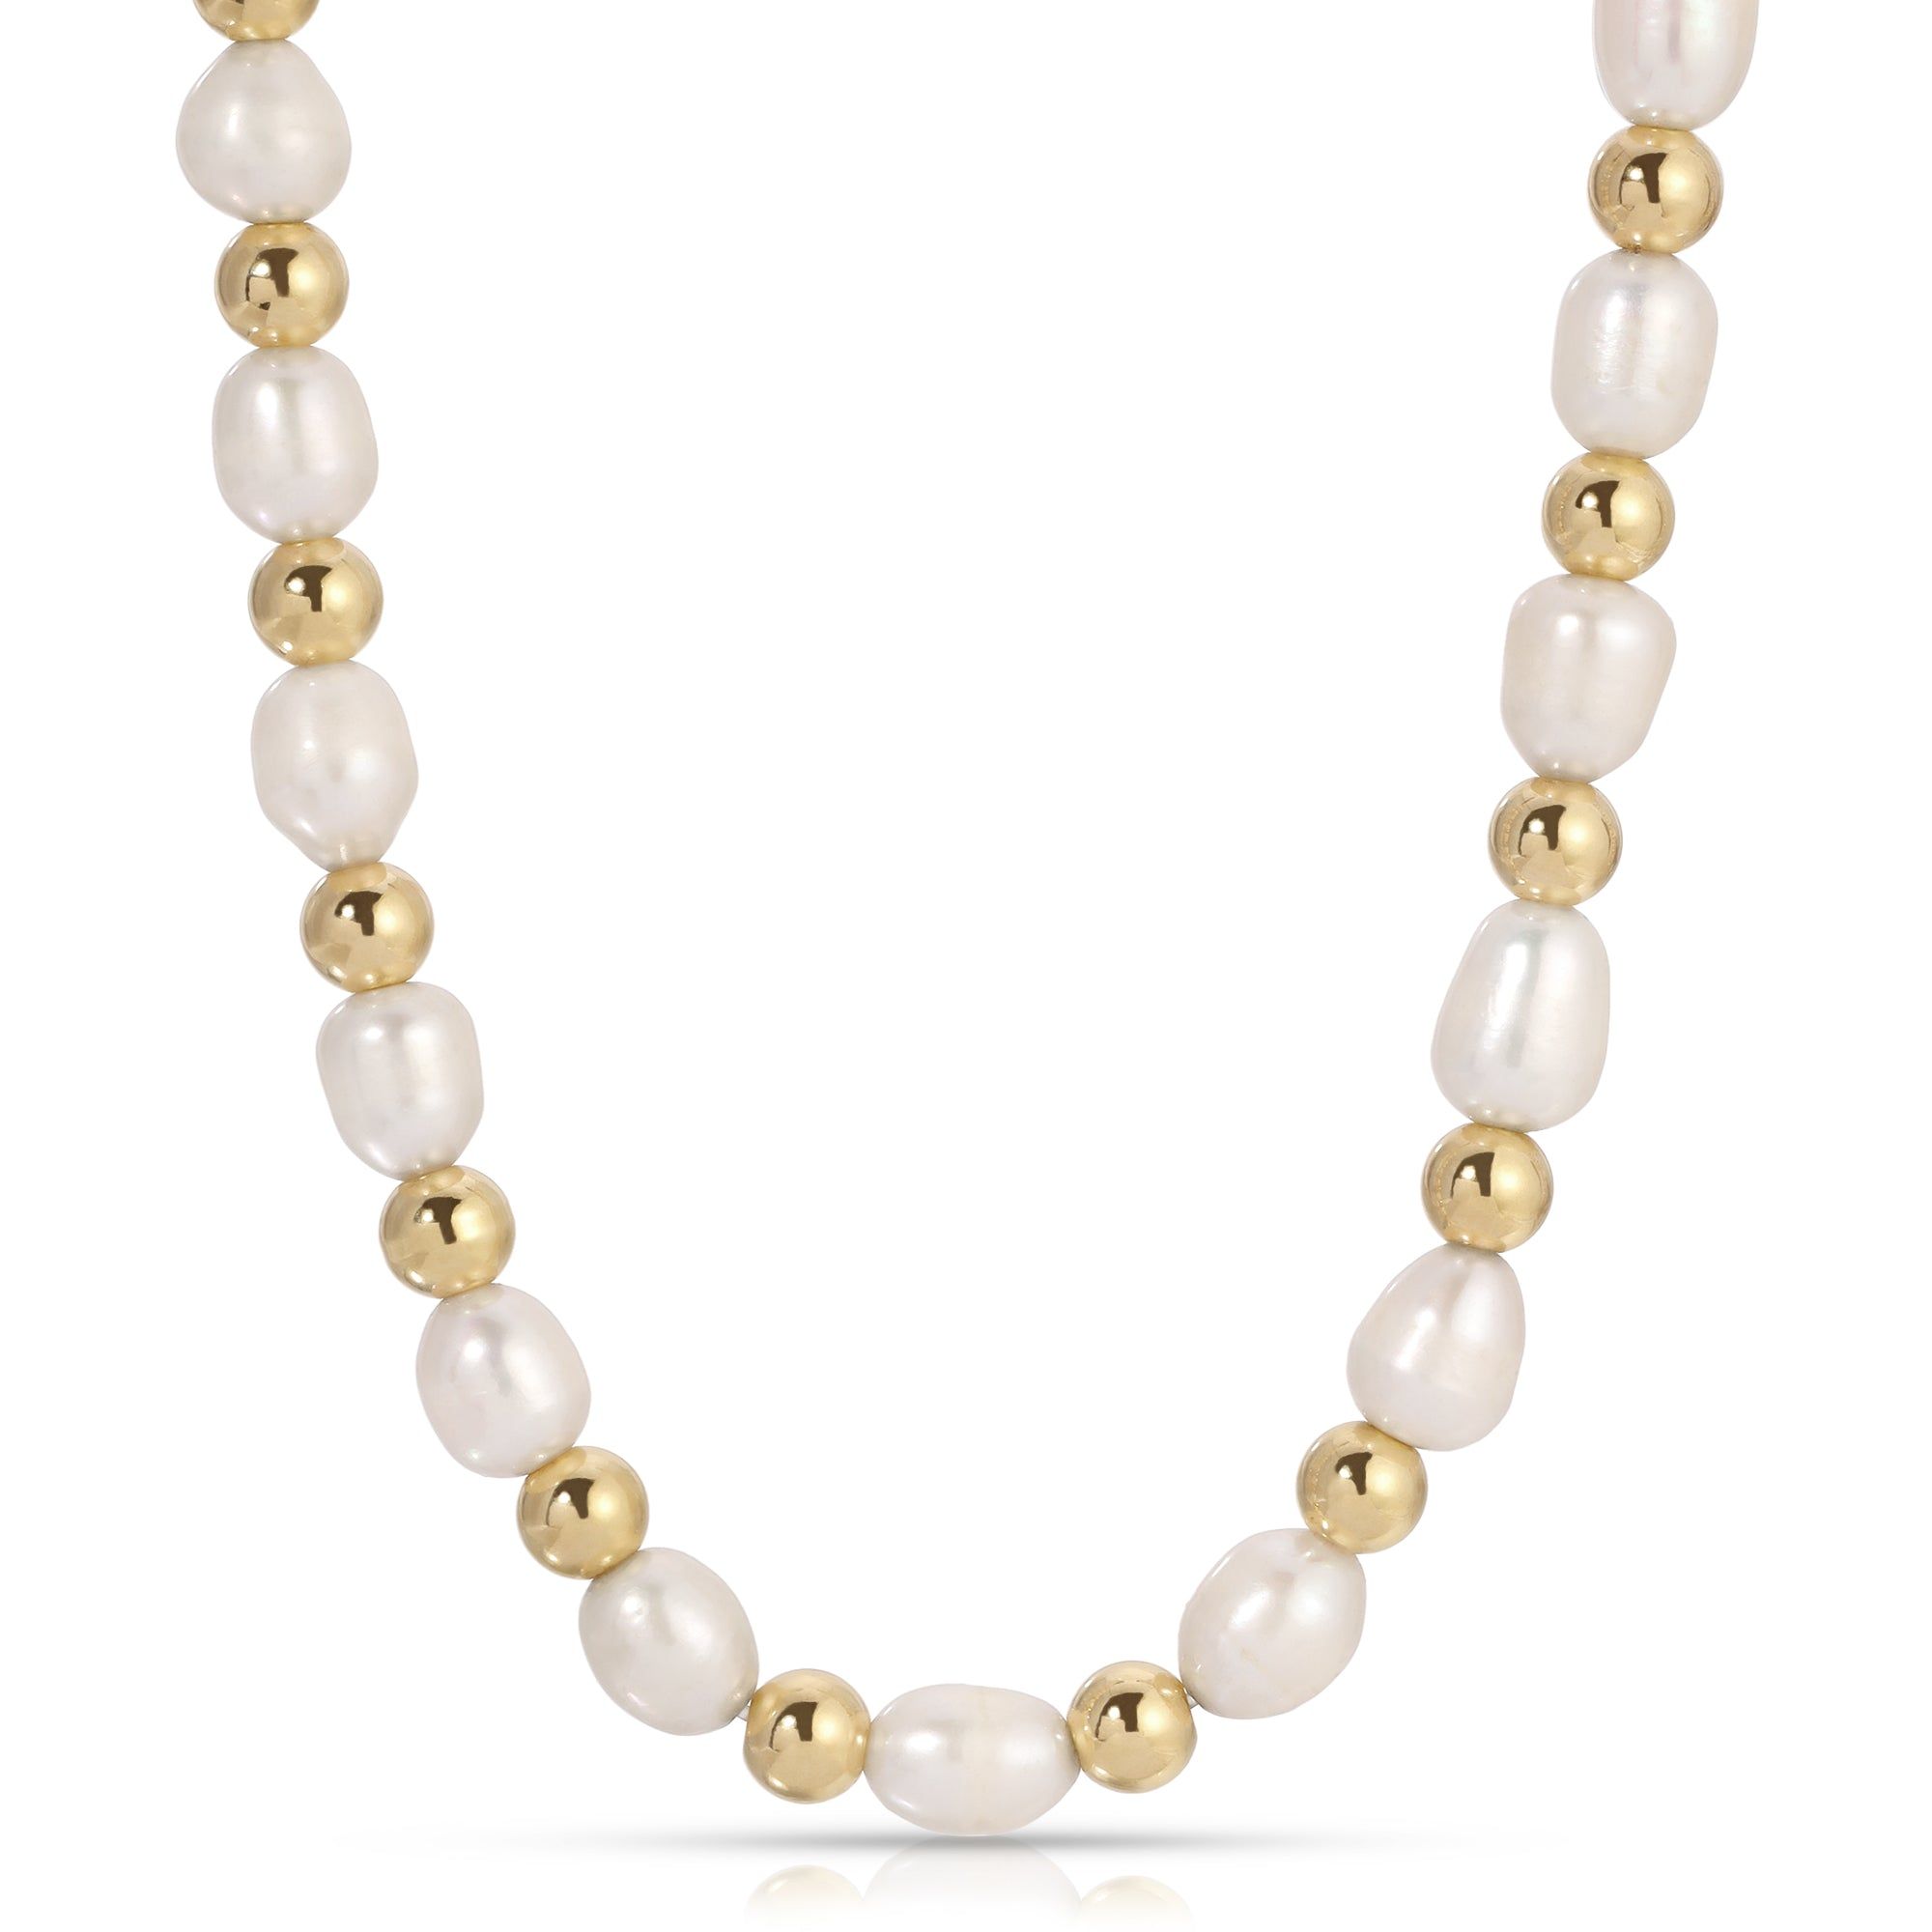 a white and gold beaded necklace on a white background